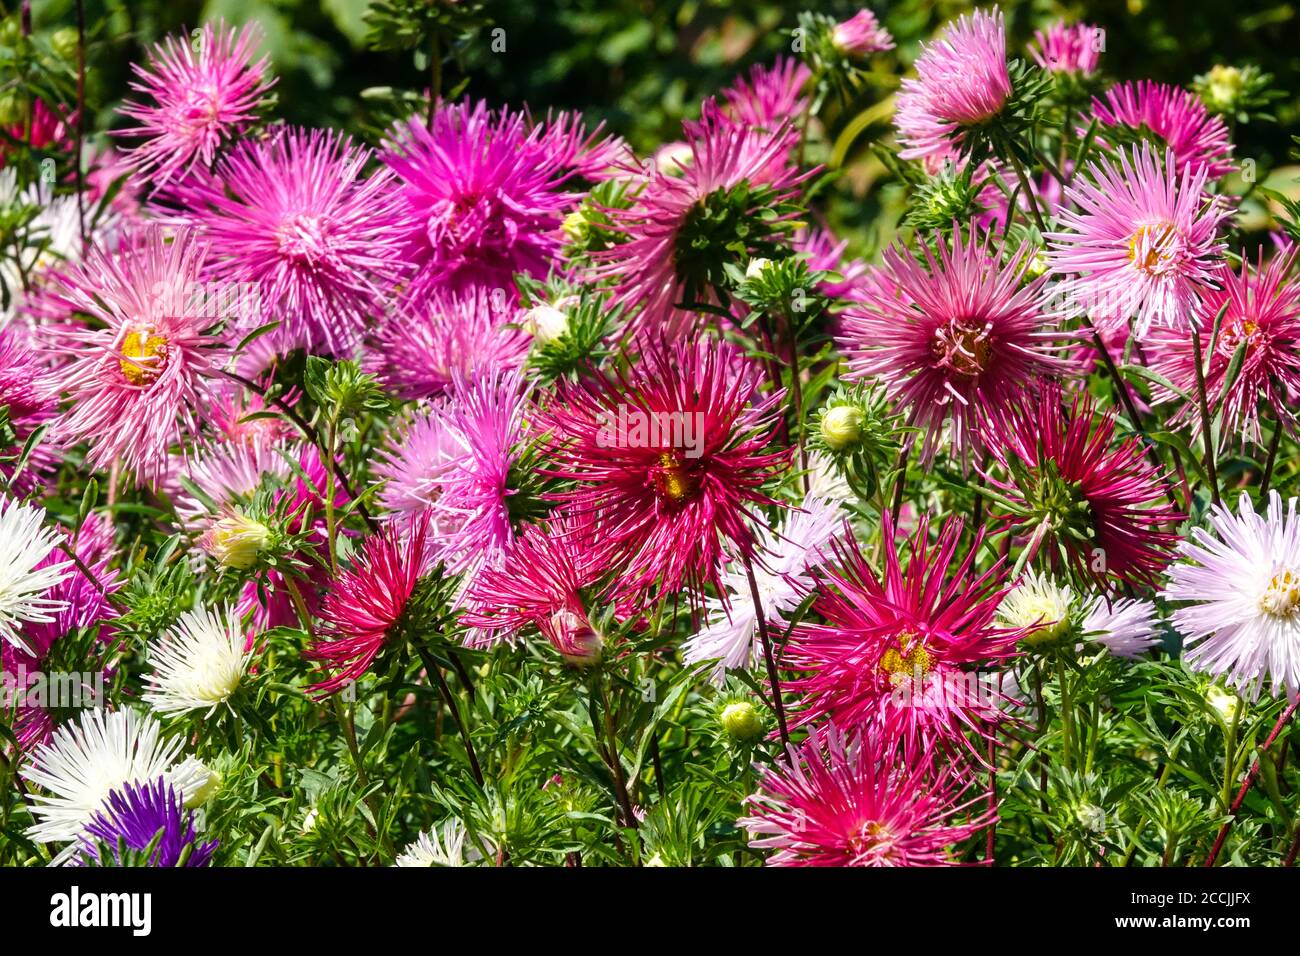 Summer flowerbed garden china aster bed Stock Photo